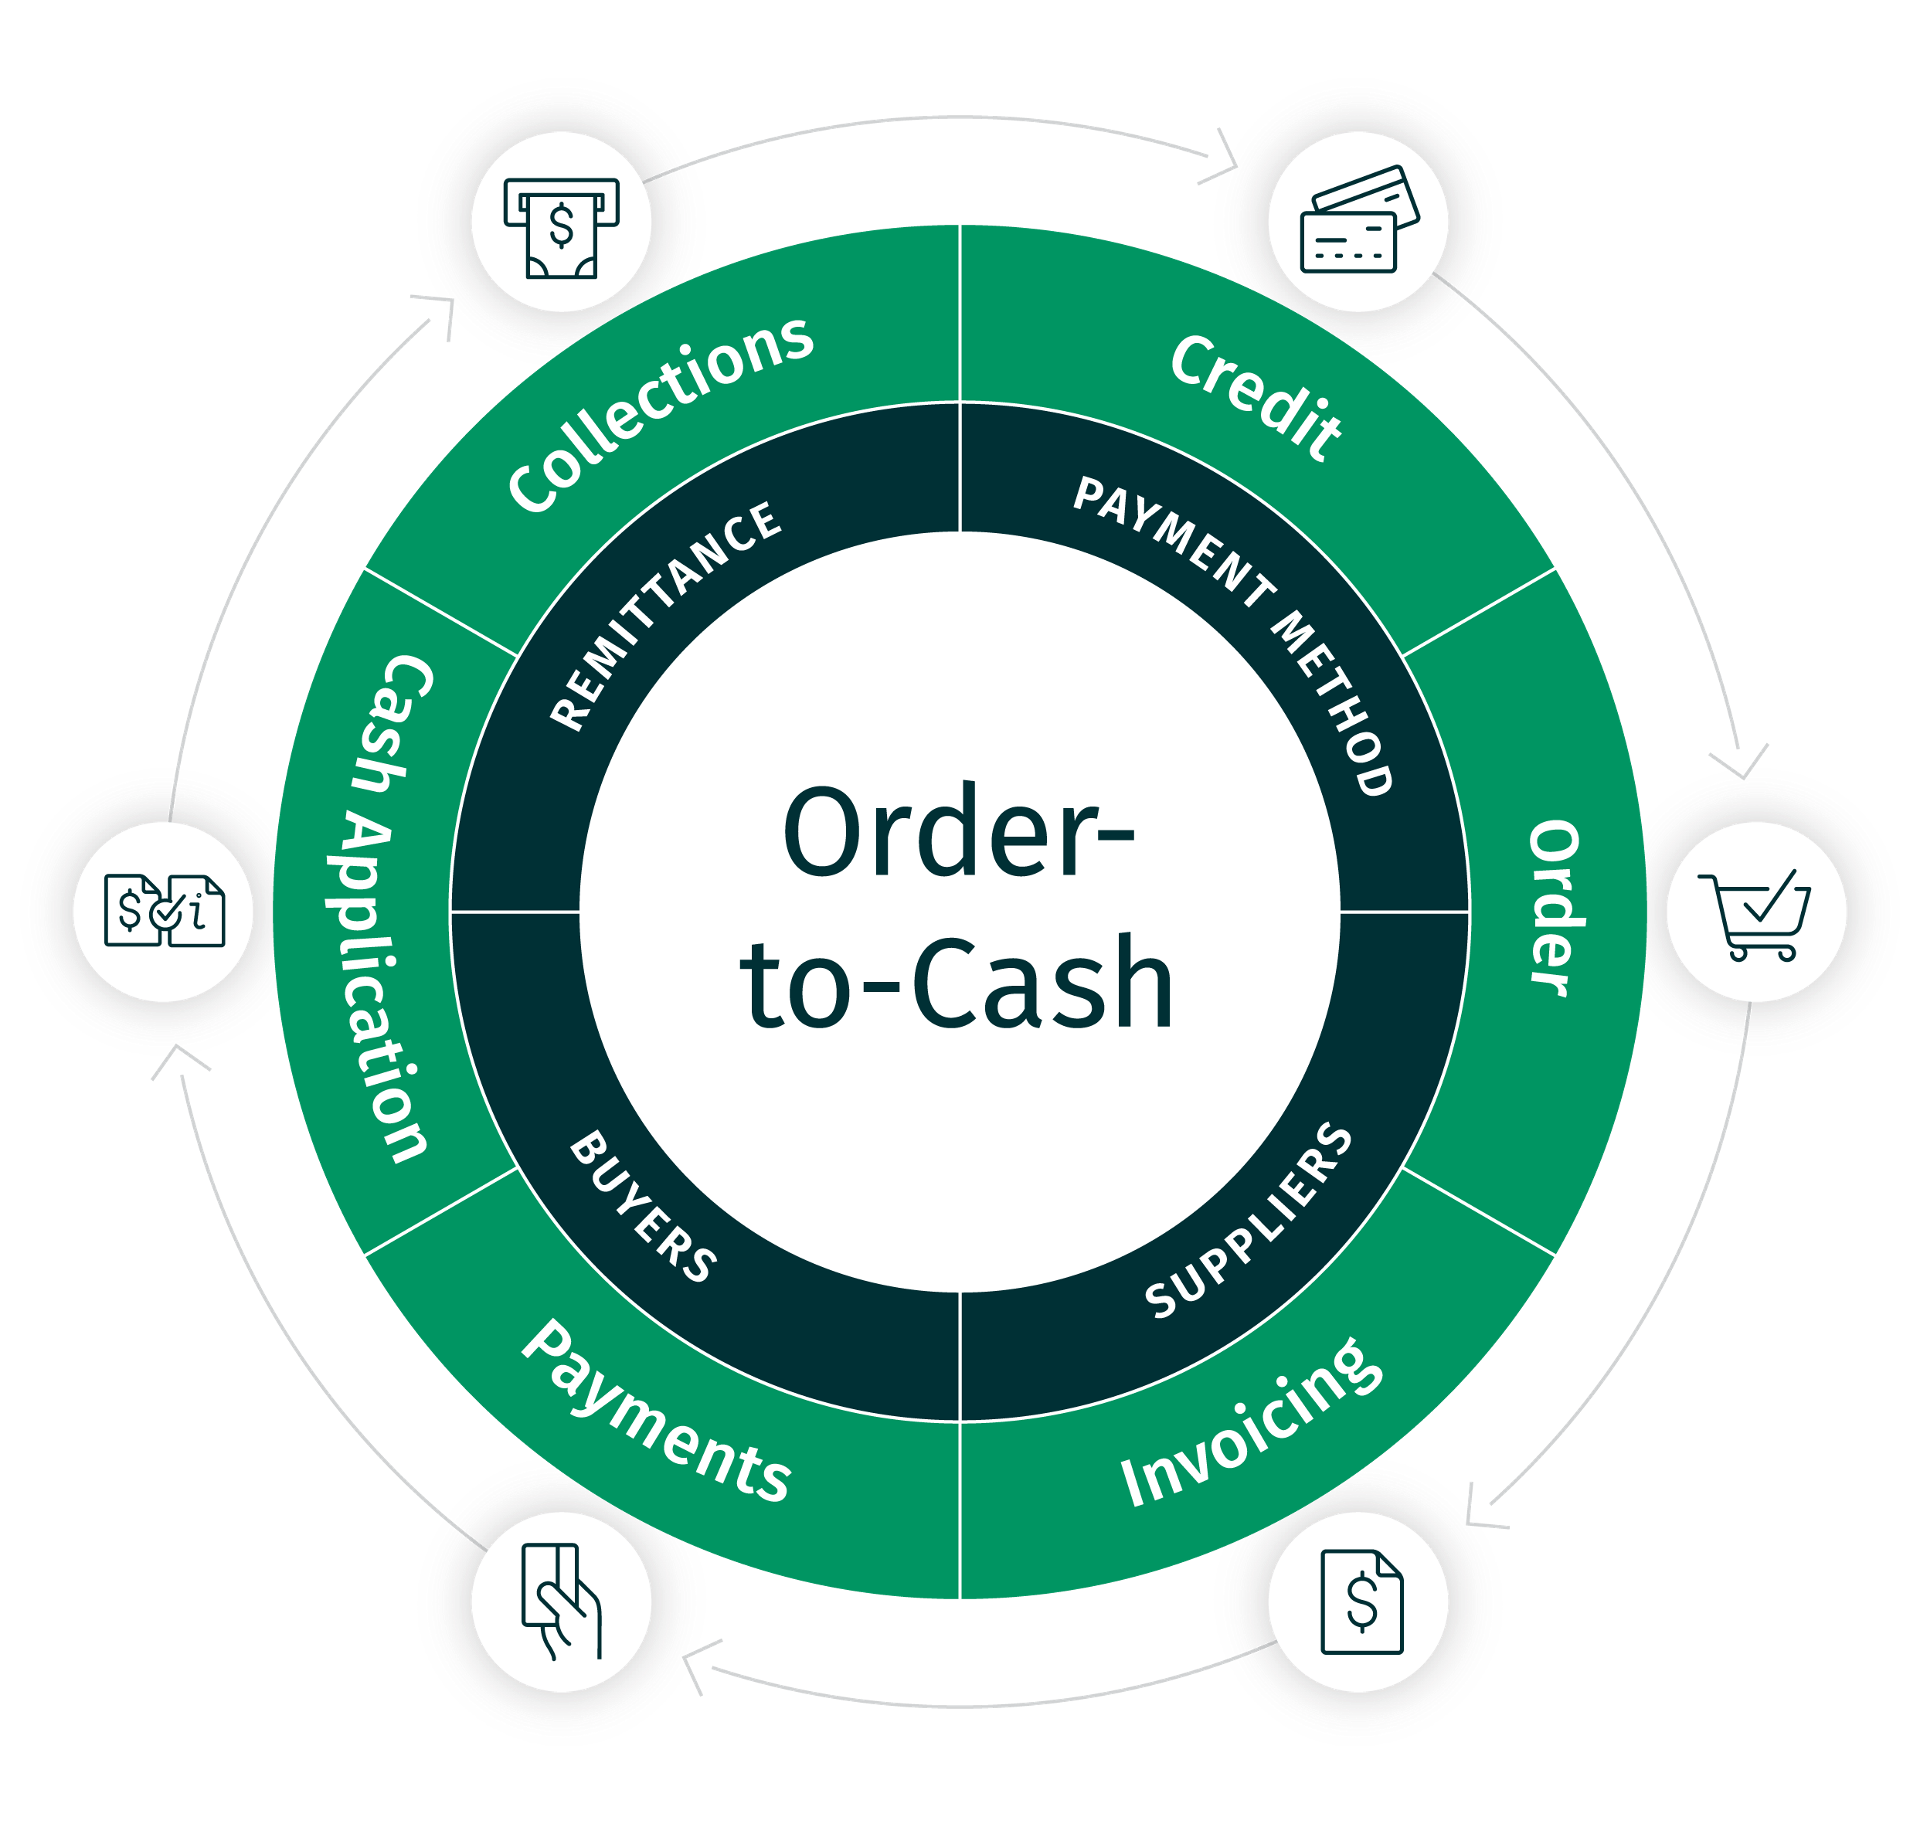 rder-to-cash cycle diagram